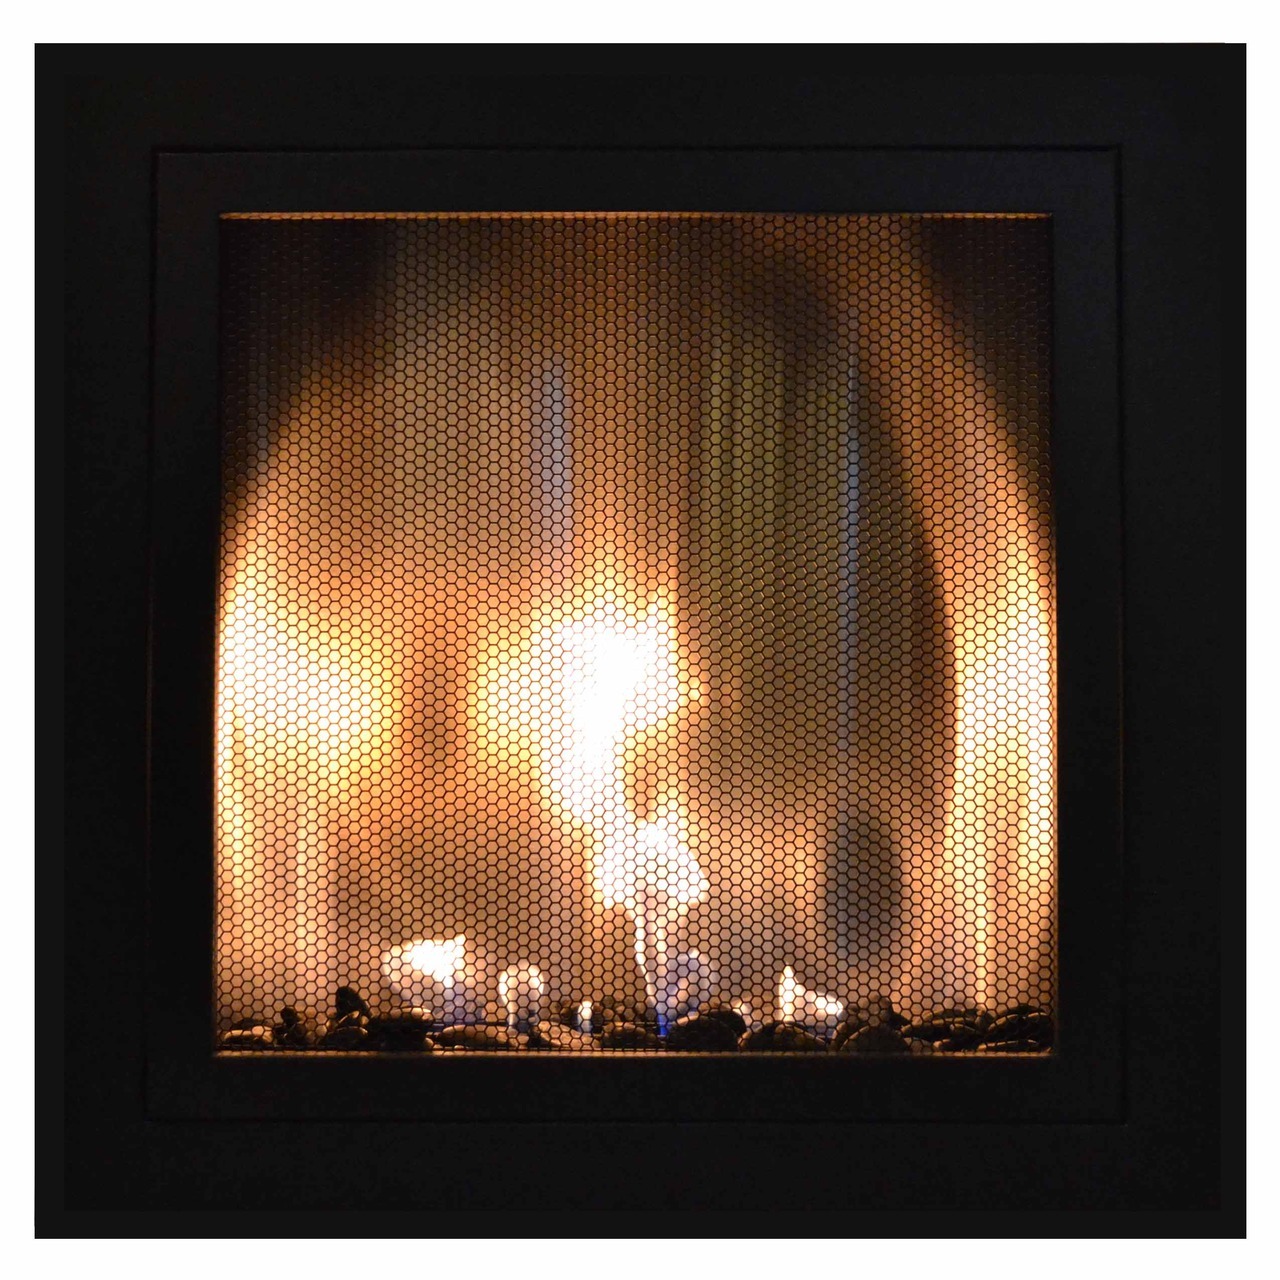 Hearth Cabinet Ventless Fireplaces Cool Hearth Cabinet